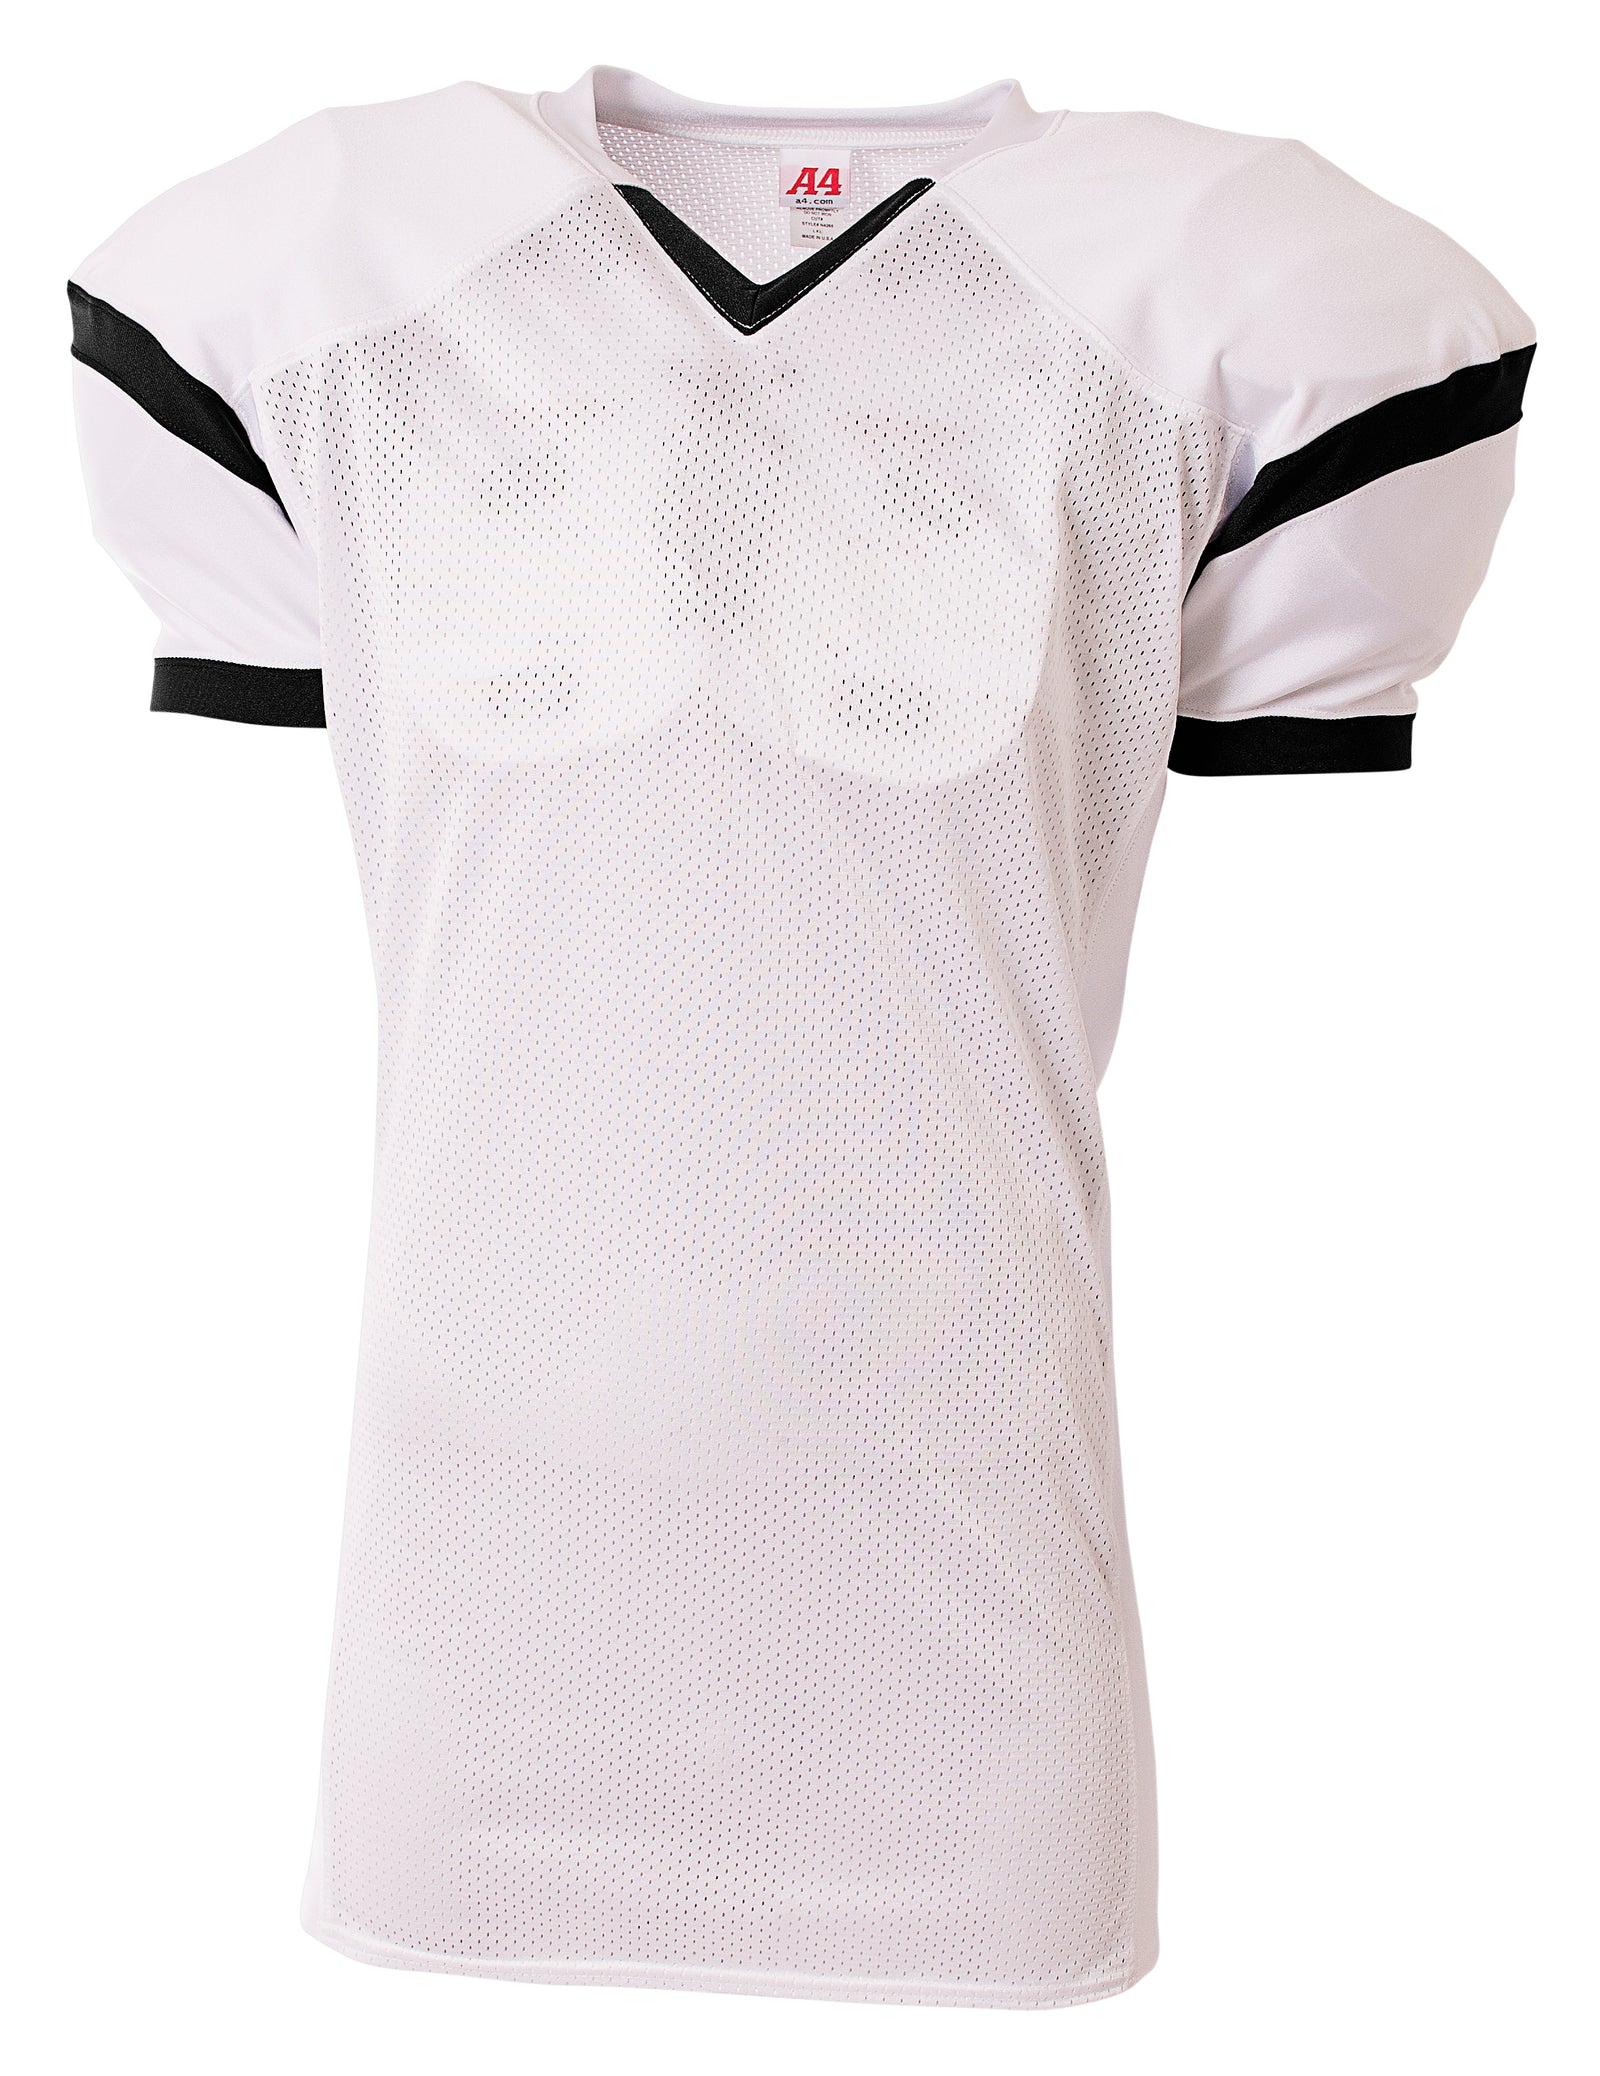 White/black A4 A4 Rollout Football Jersey